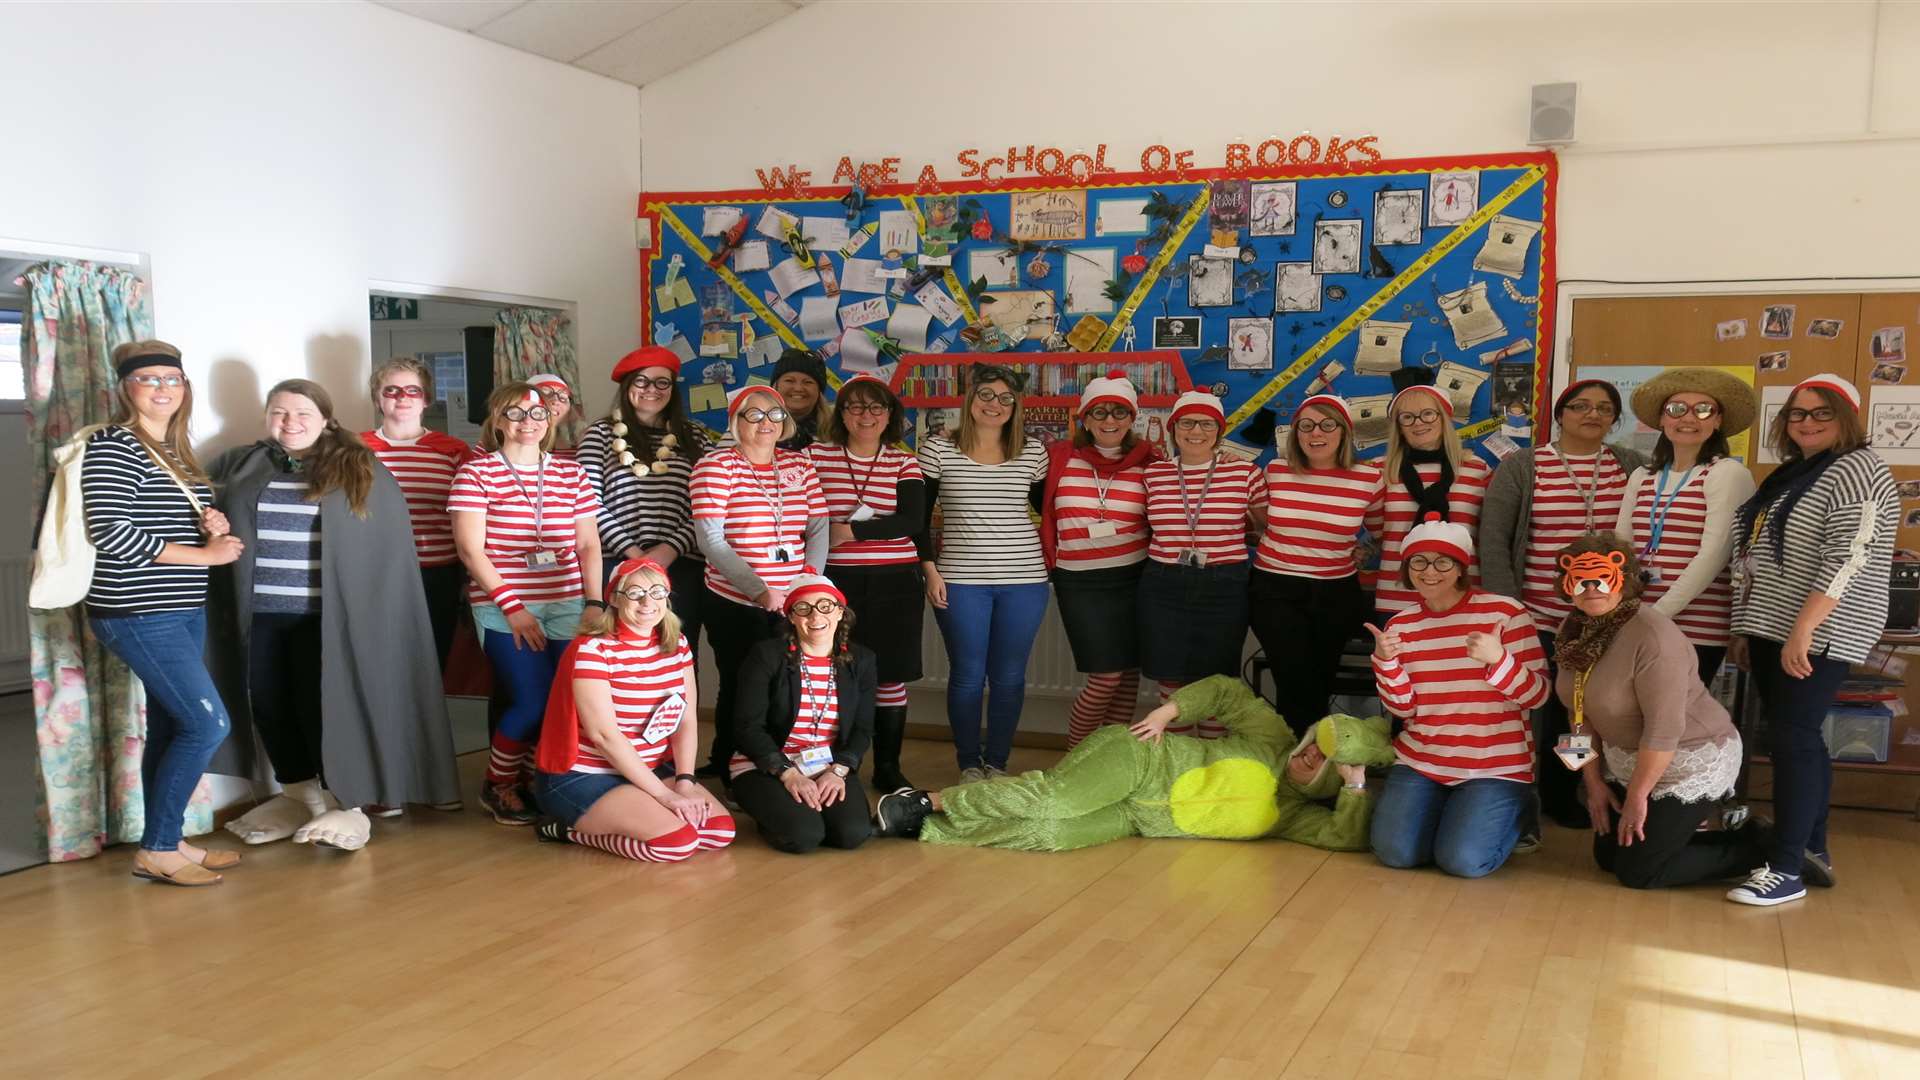 Teachers from Great Chart Primary School in Ashford dressed up as different versions of 'Where's Wally?'